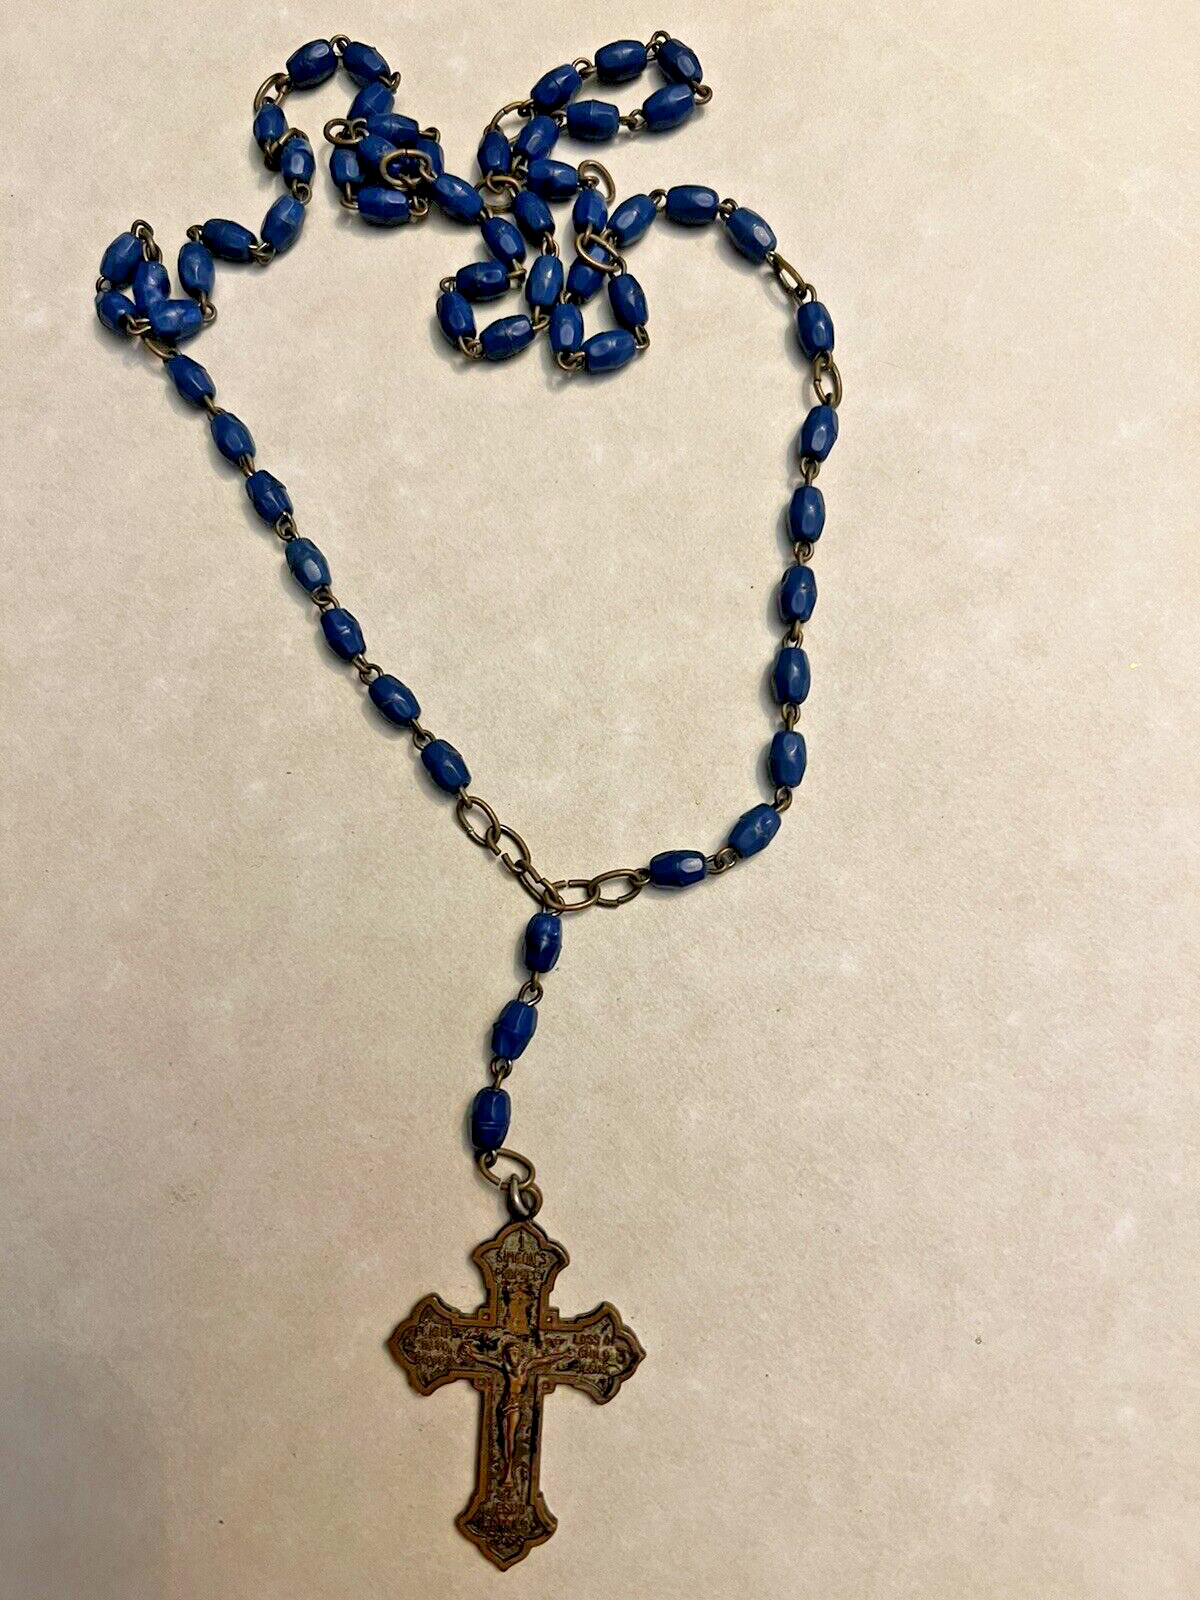 Rosario Virgen Dolorosa The Rosary of Our Lady of 7 Sorrows Blue Bakelite beads